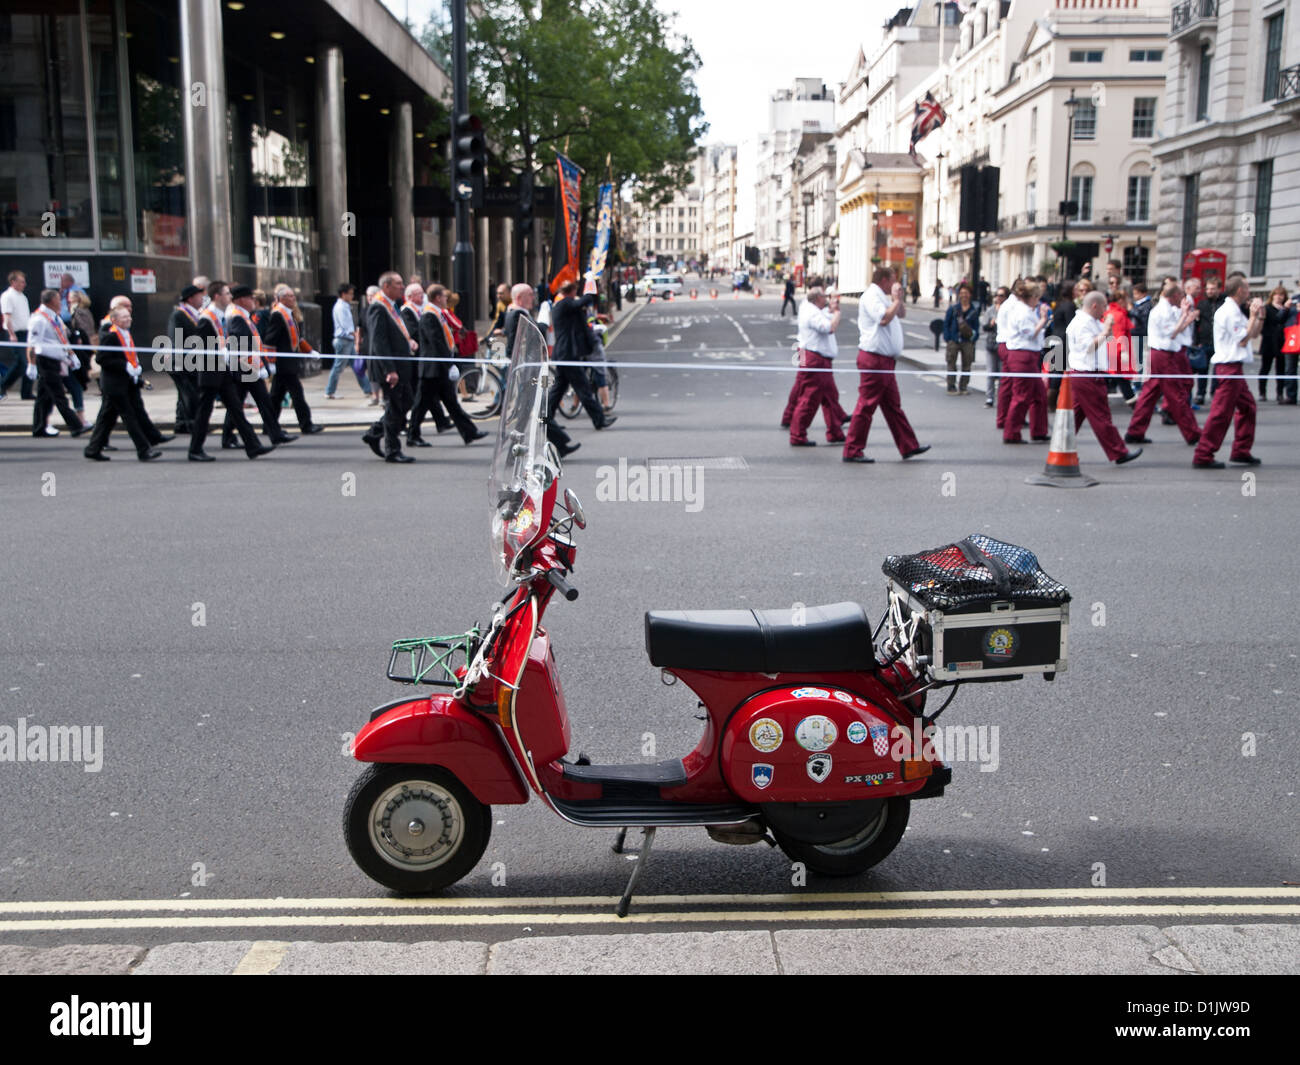 An Orange Order march through the streets of London, during the summer of 2012. A red Vespa is parked in the foreground. Stock Photo